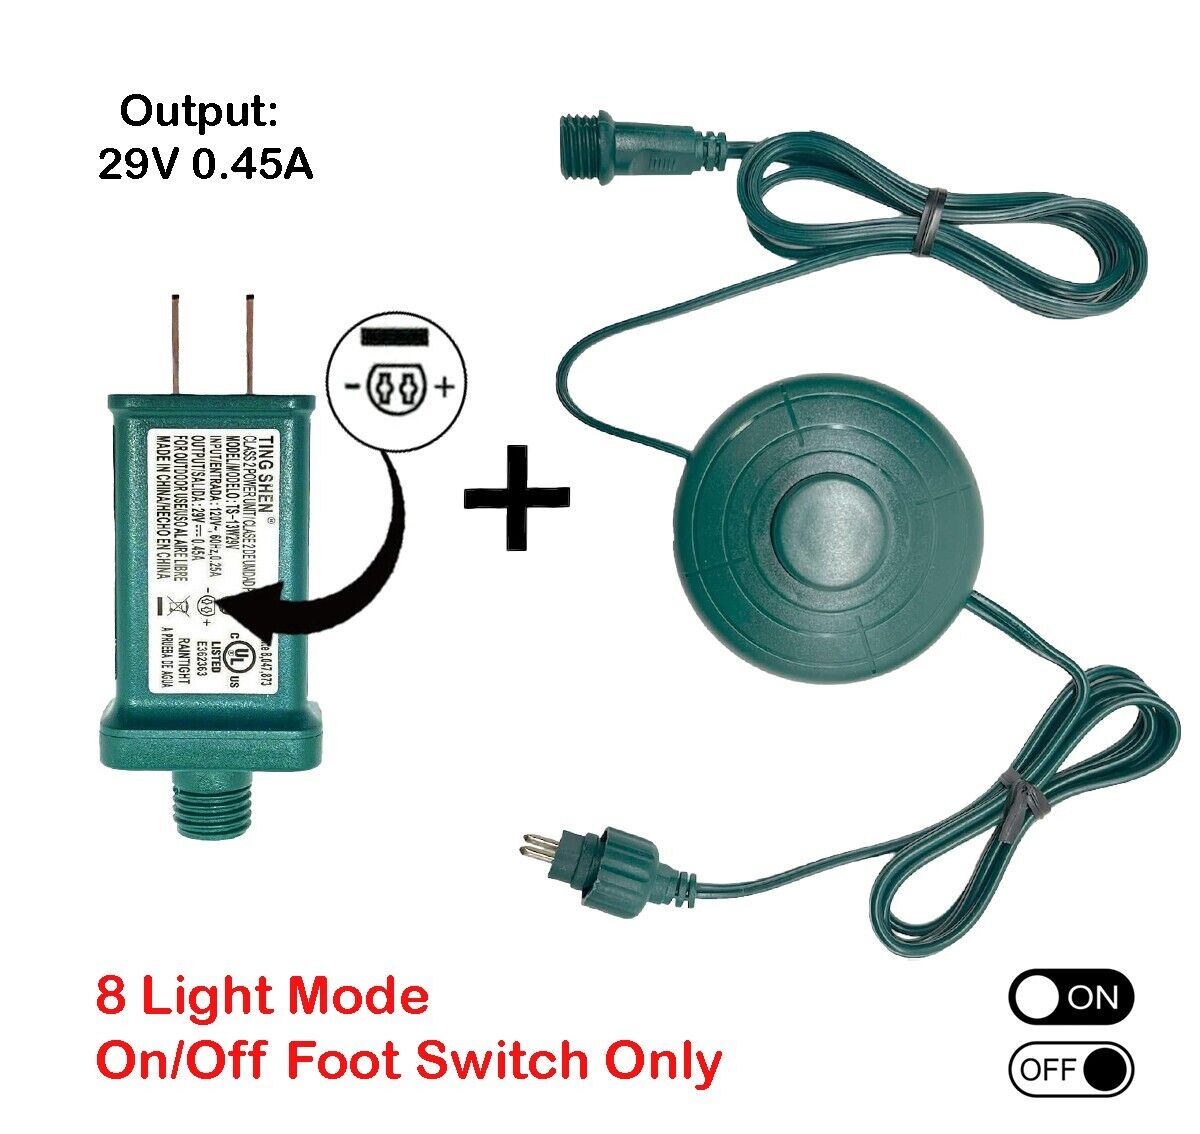 Set Adapter DC 29V 0.45A + Power Cord Foot Switch 1/2in Plug 6Ft - 8 LIGHT MODE